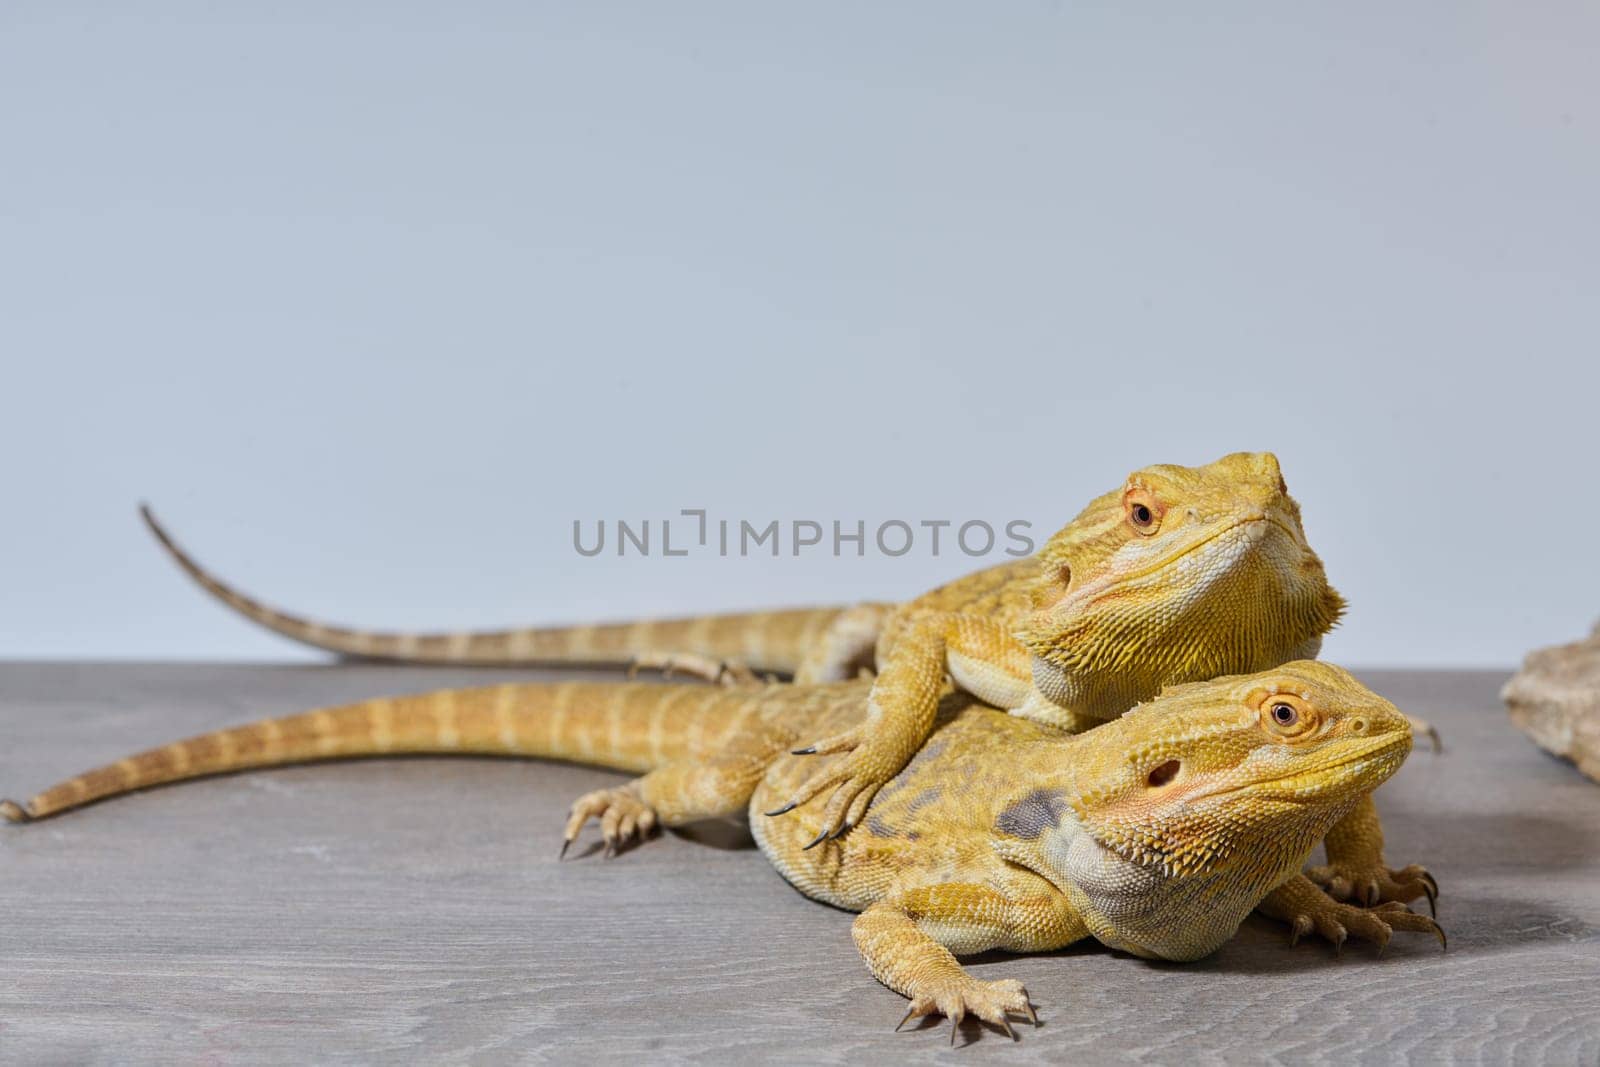 Bearded Dragons: A Close-Up Look at This Amazing Lizards by dotshock